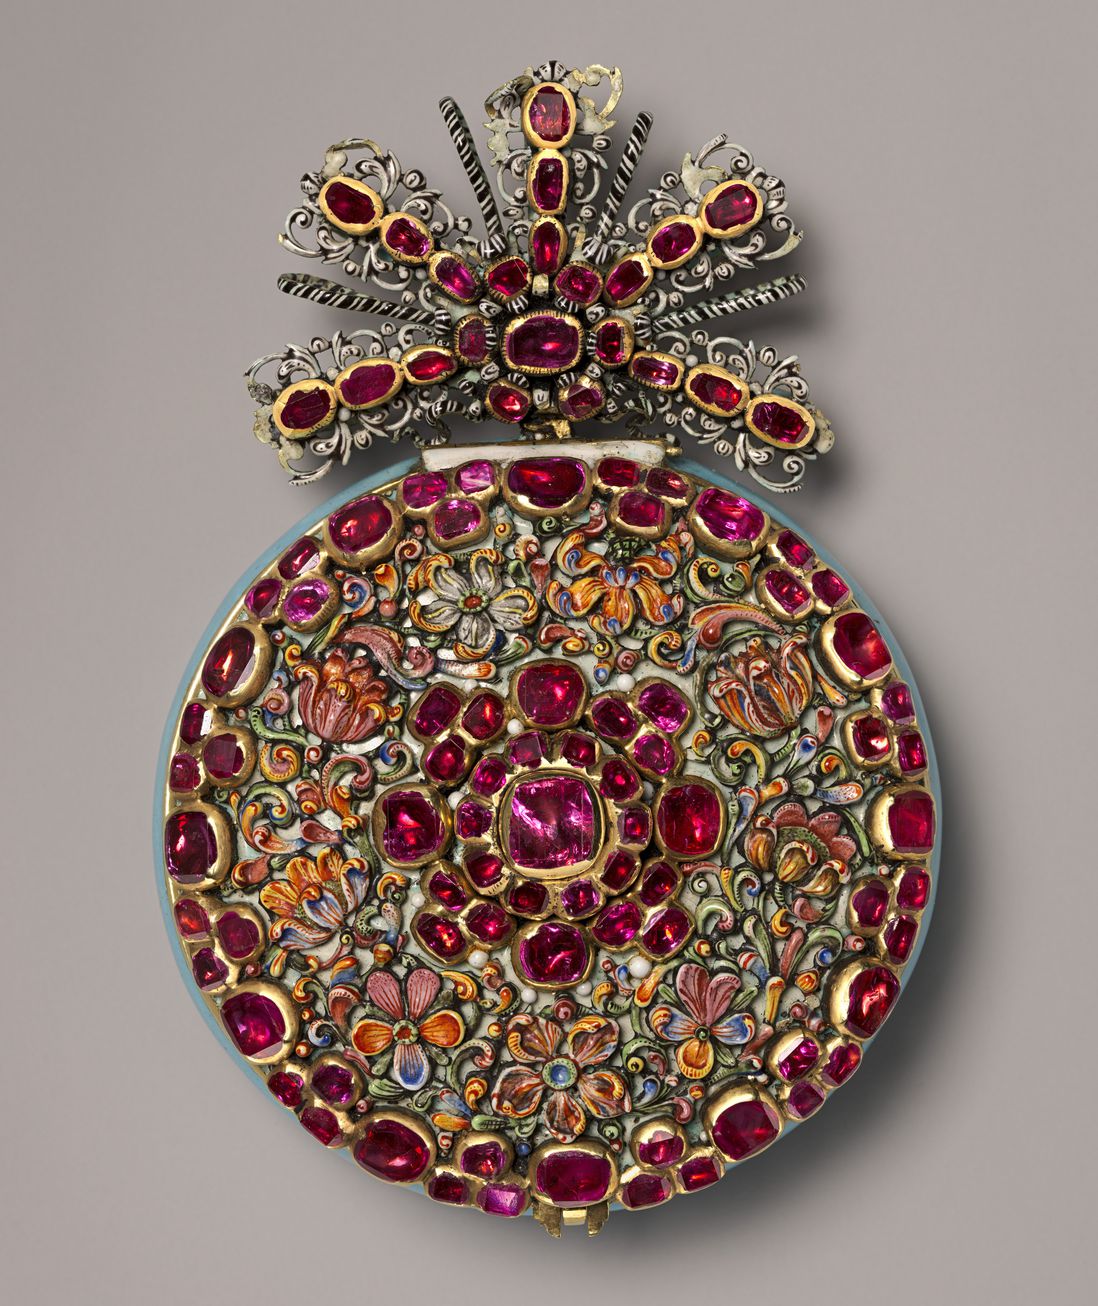 The Great Ruby Watch, ca 1670